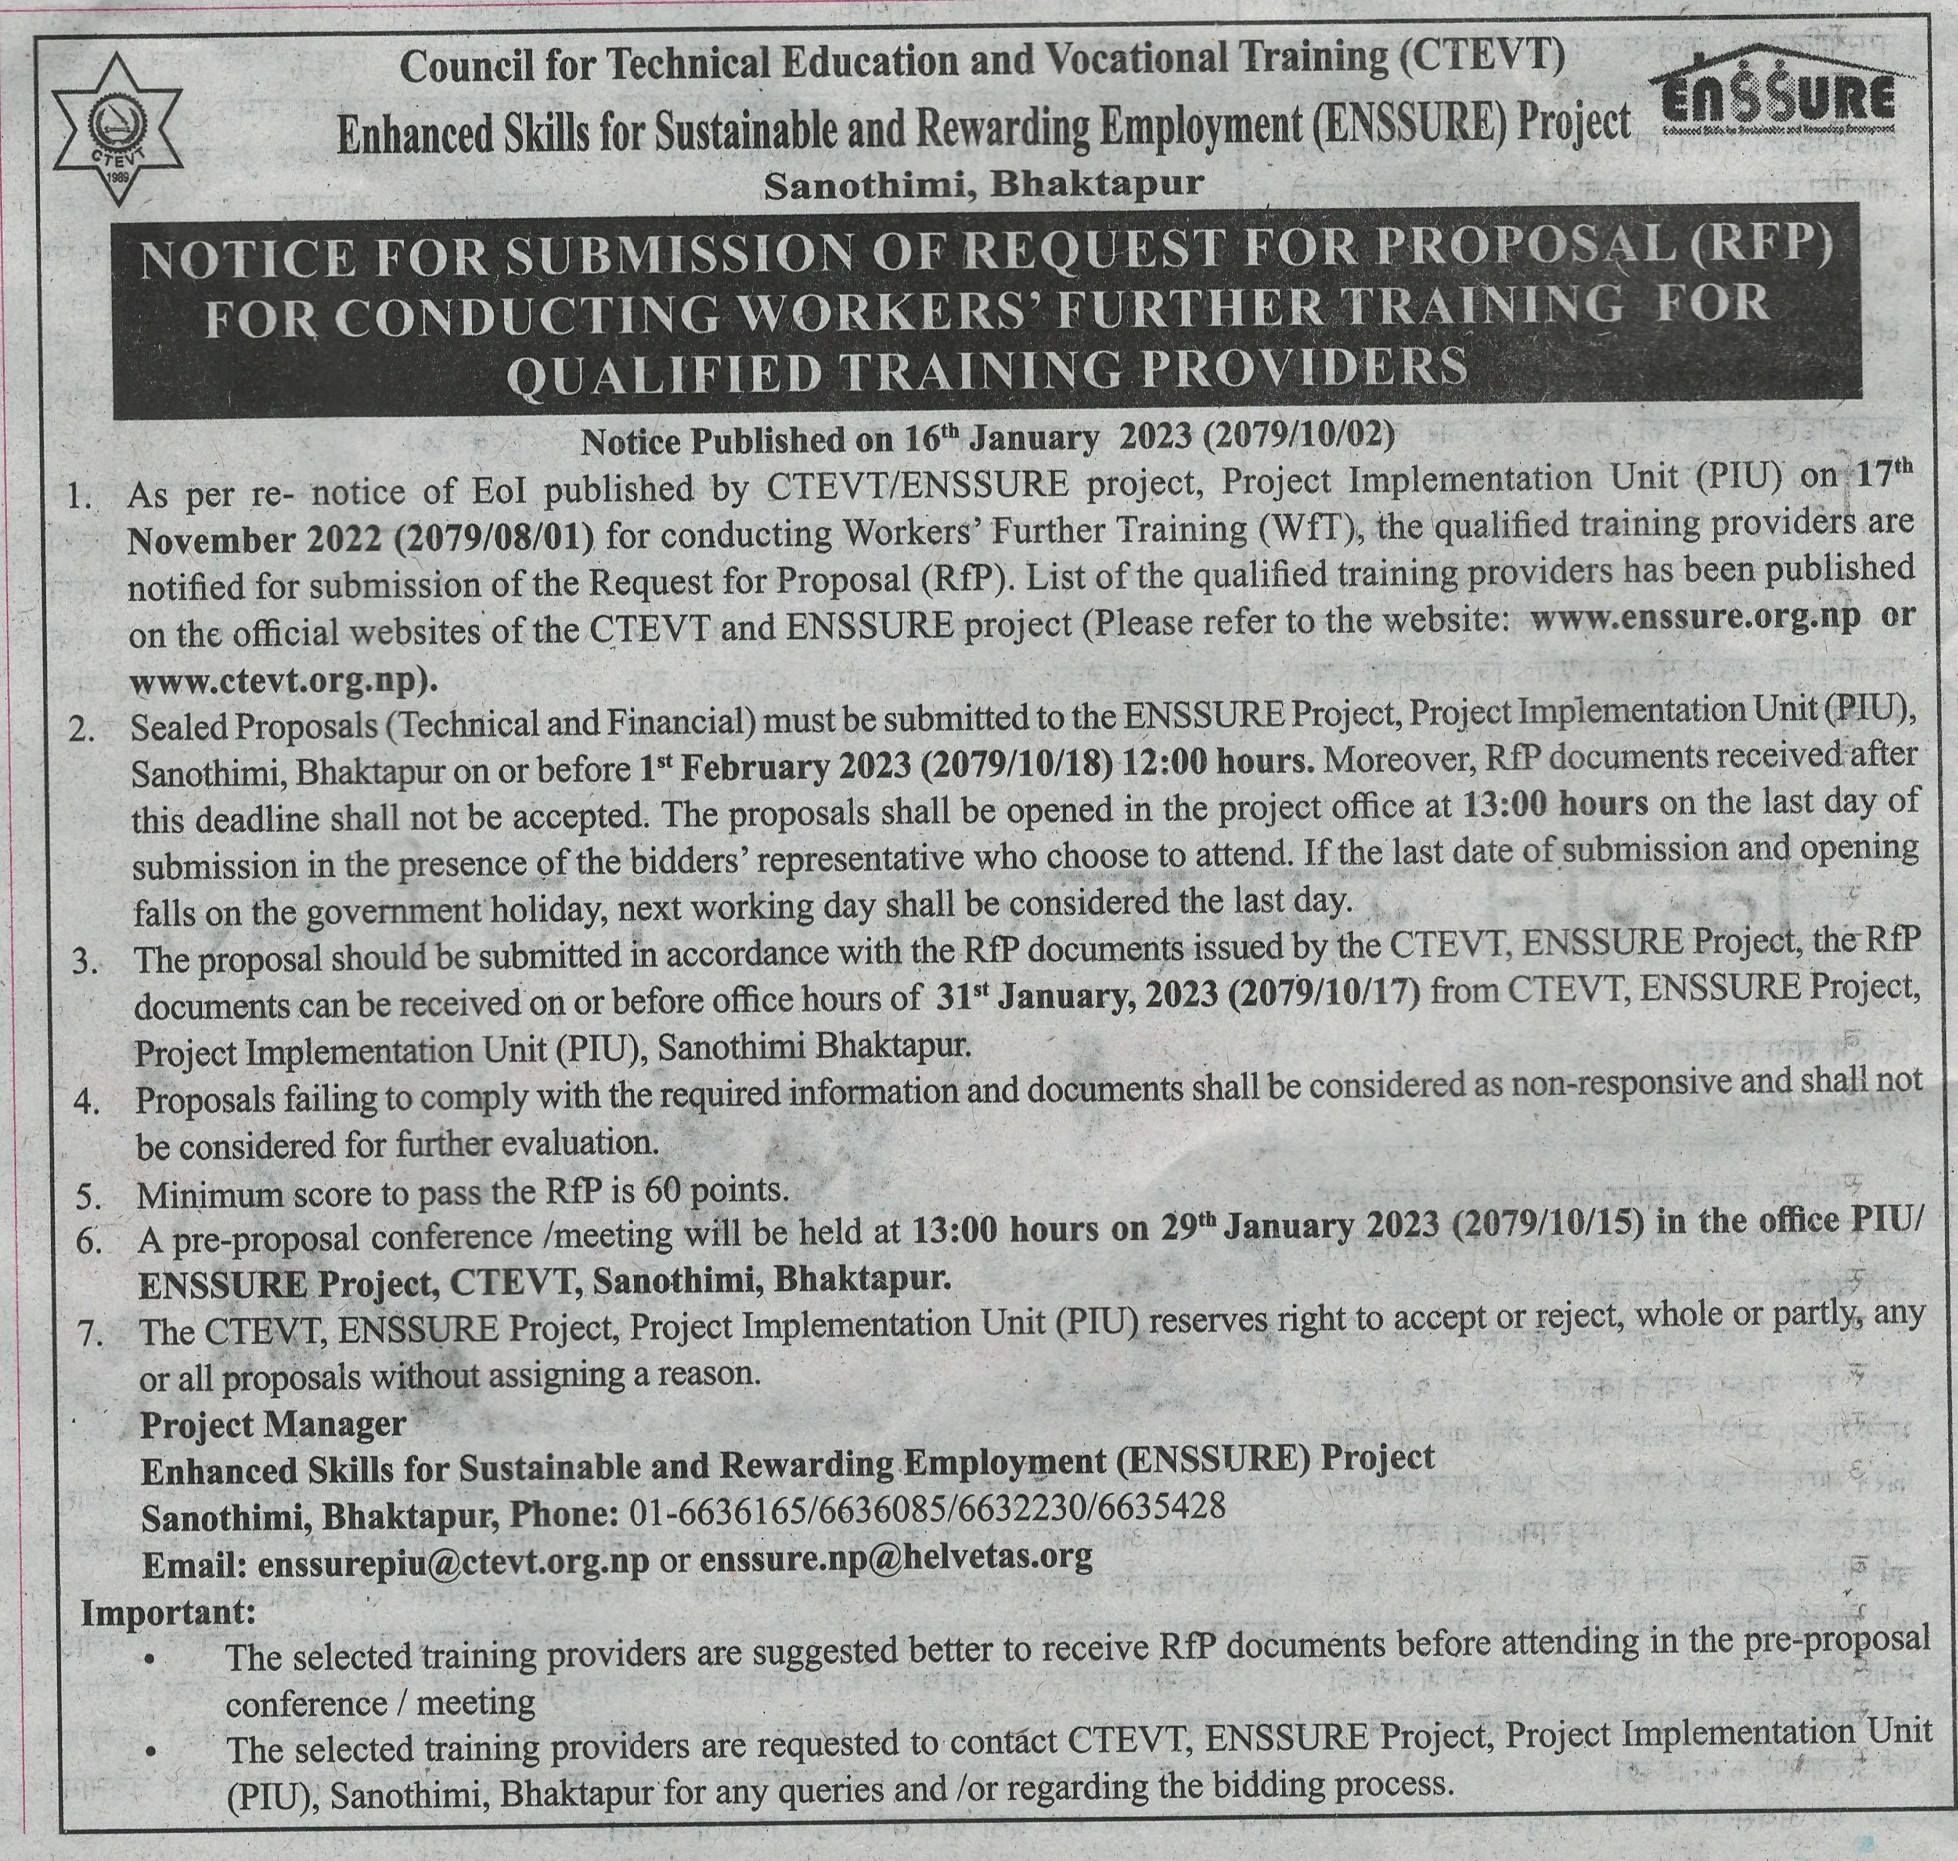 NOTICE FOR SUBMISSION OF REQUEST FOR PROPOSAL (RFP)  FOR CONDUCTING WORKERS’ FURTHER TRAINING  FOR QUALIFIED TRAINING PROVIDERS